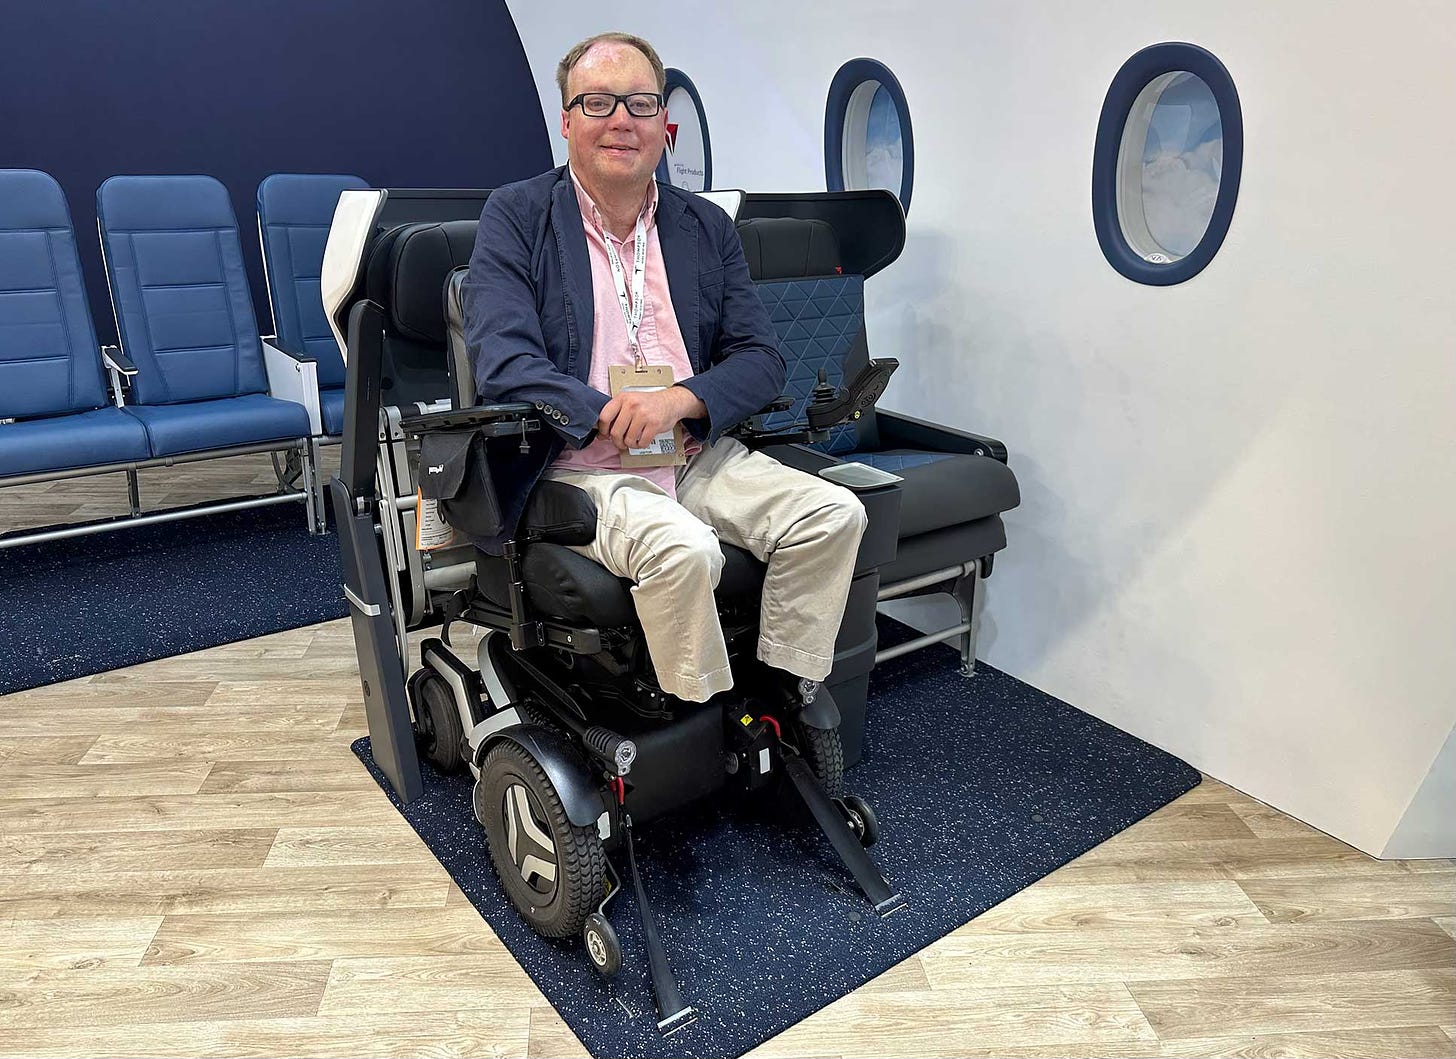 John seated in his wheelchair which is strapped to the floor of a model airplane.